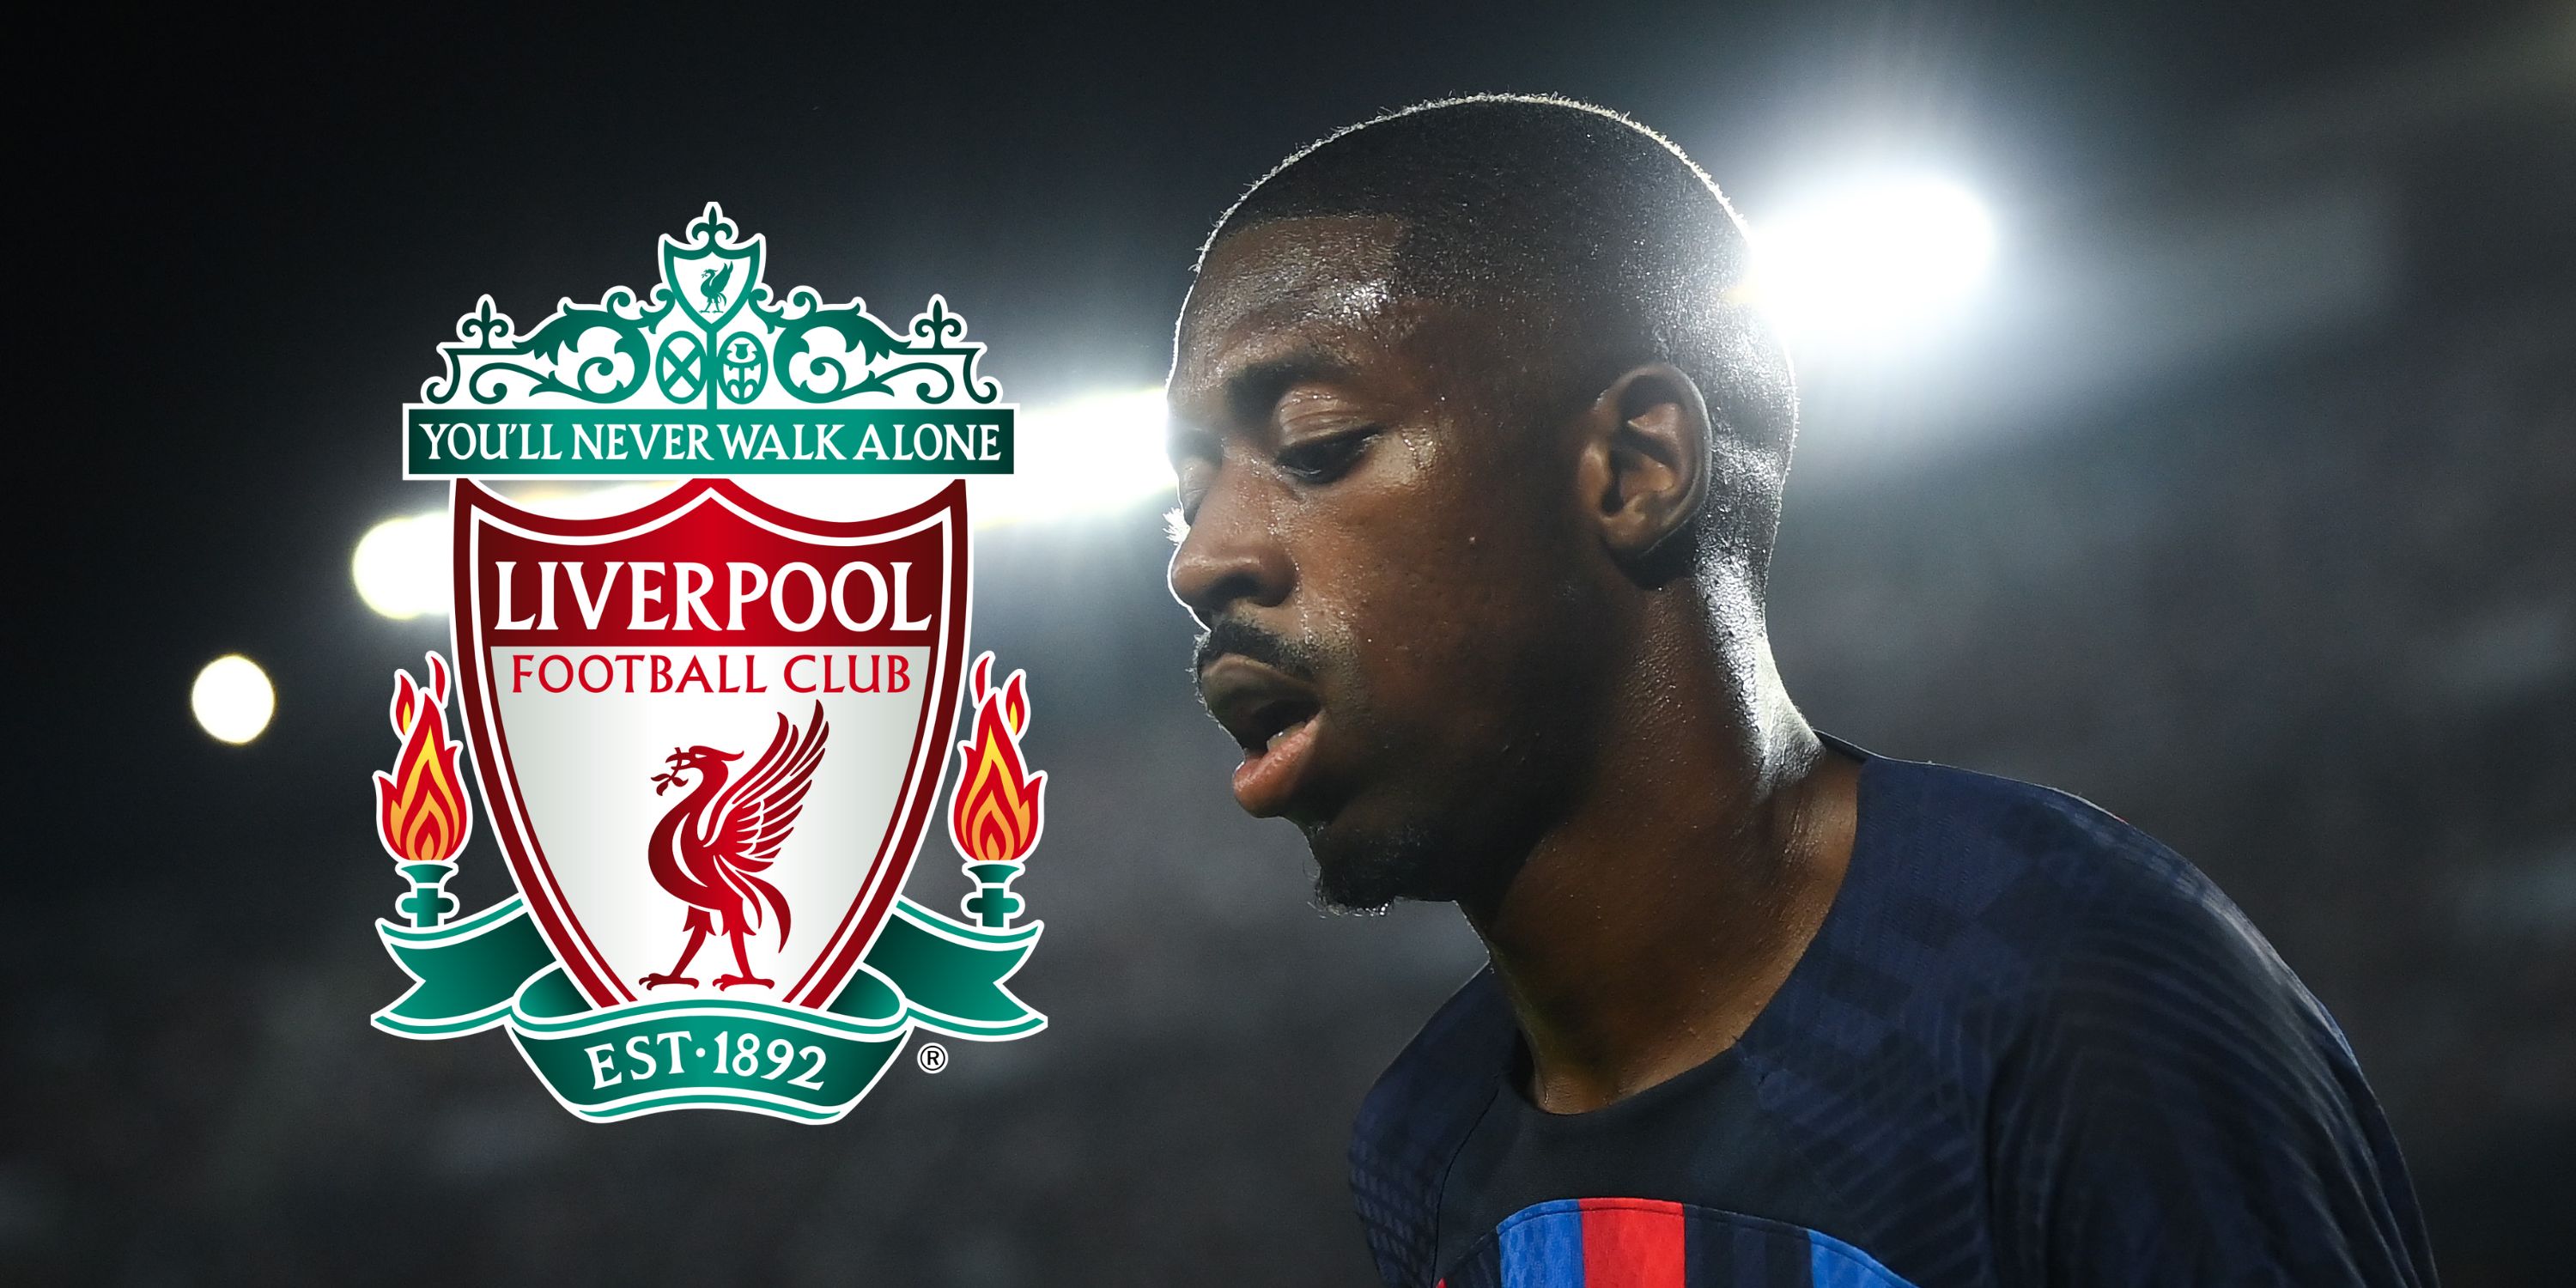 Liverpool told to buy ‘nightmare’ winger who would be near impossible to stop